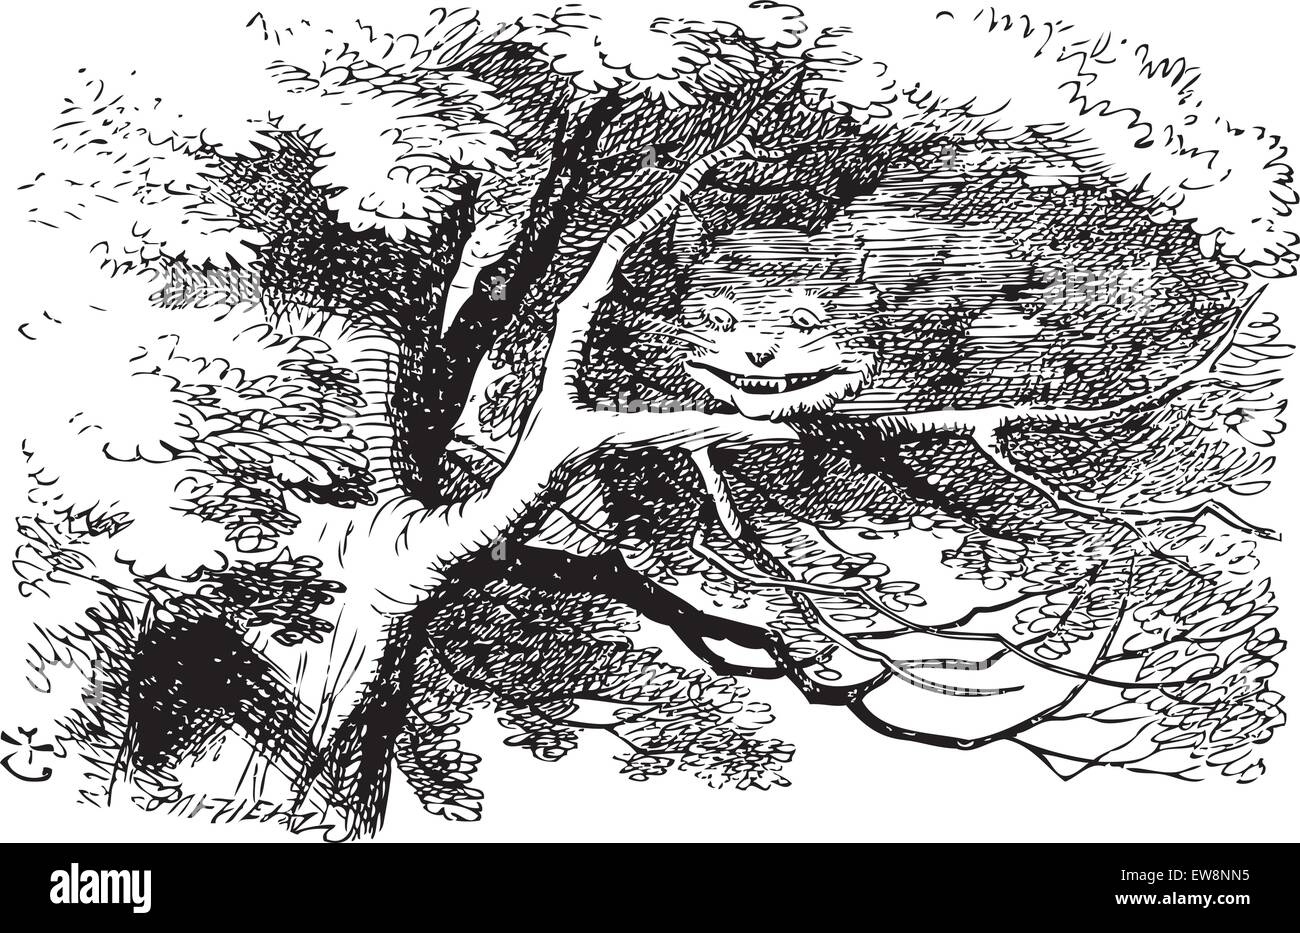 Alice in Wonderland. Cheshire Cat fading to smile. The cat vanished quite slowly, beginning with the end of the tail, and ending with the grin, which remained some time after the rest of it had gone. Stock Vector